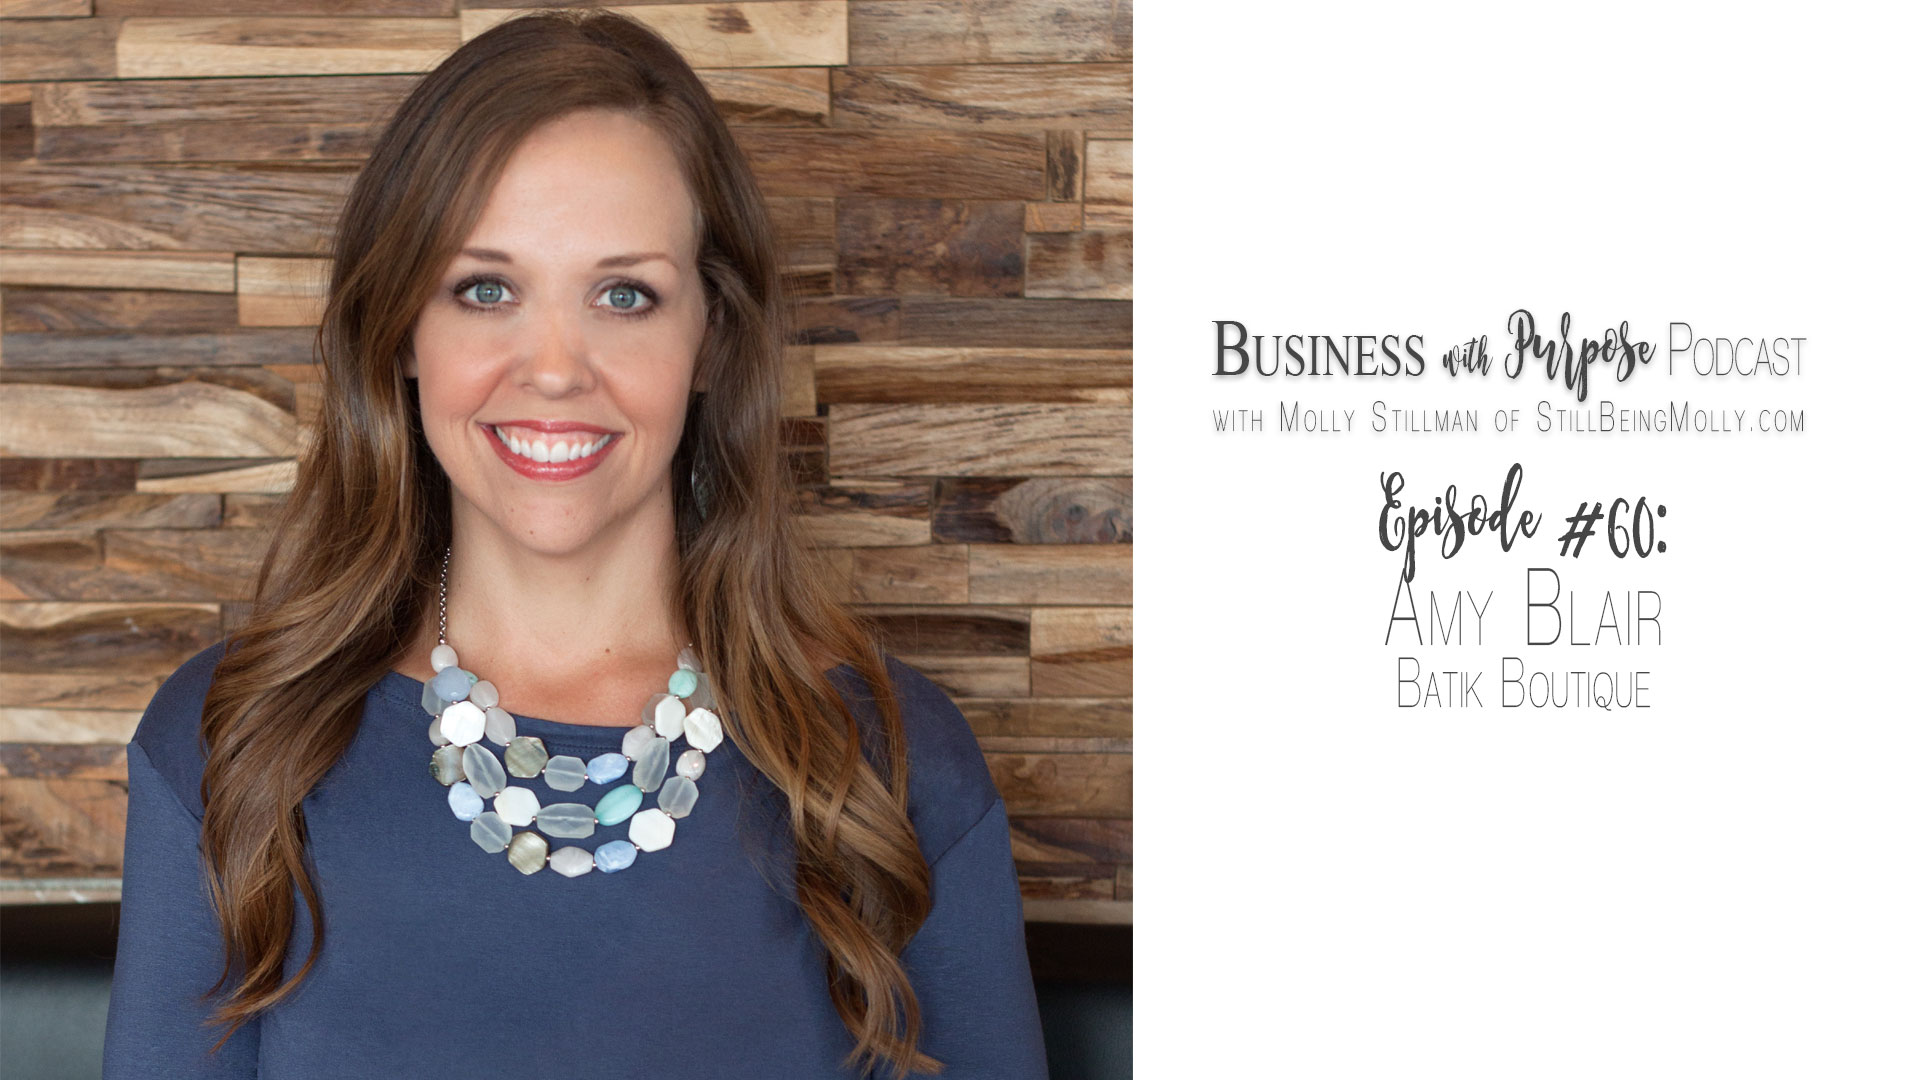 Business with Purpose Podcast EP 60: Amy Blair, Founder of Batik Boutique by North Carolina ethical blogger Still Being Molly